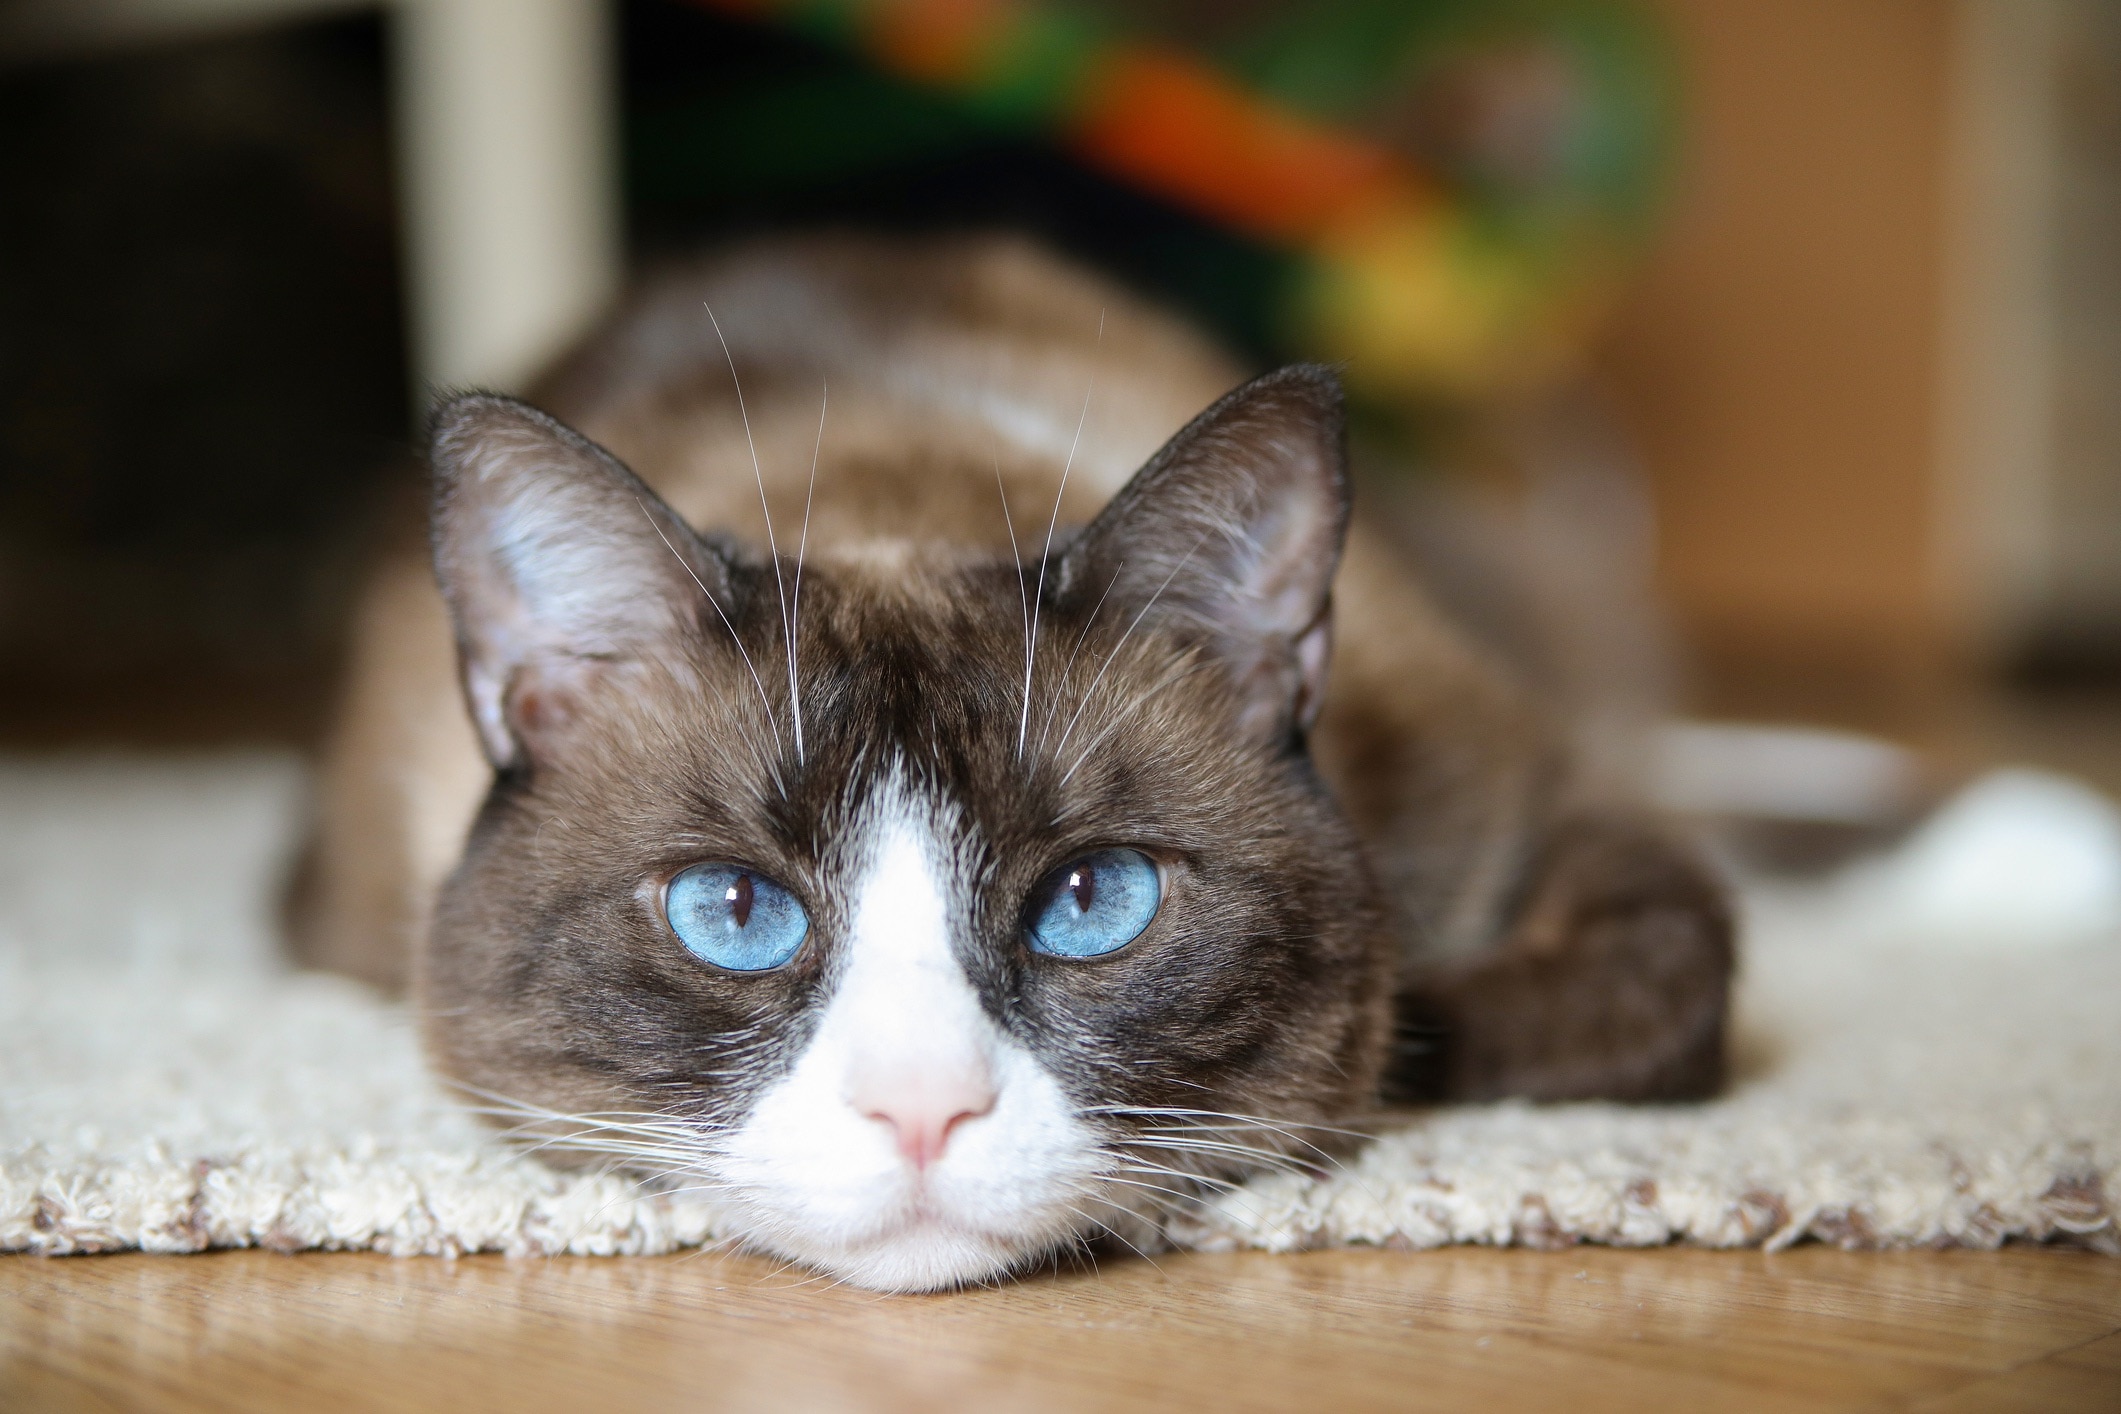 snowshoe cat lying down and looking at the camera